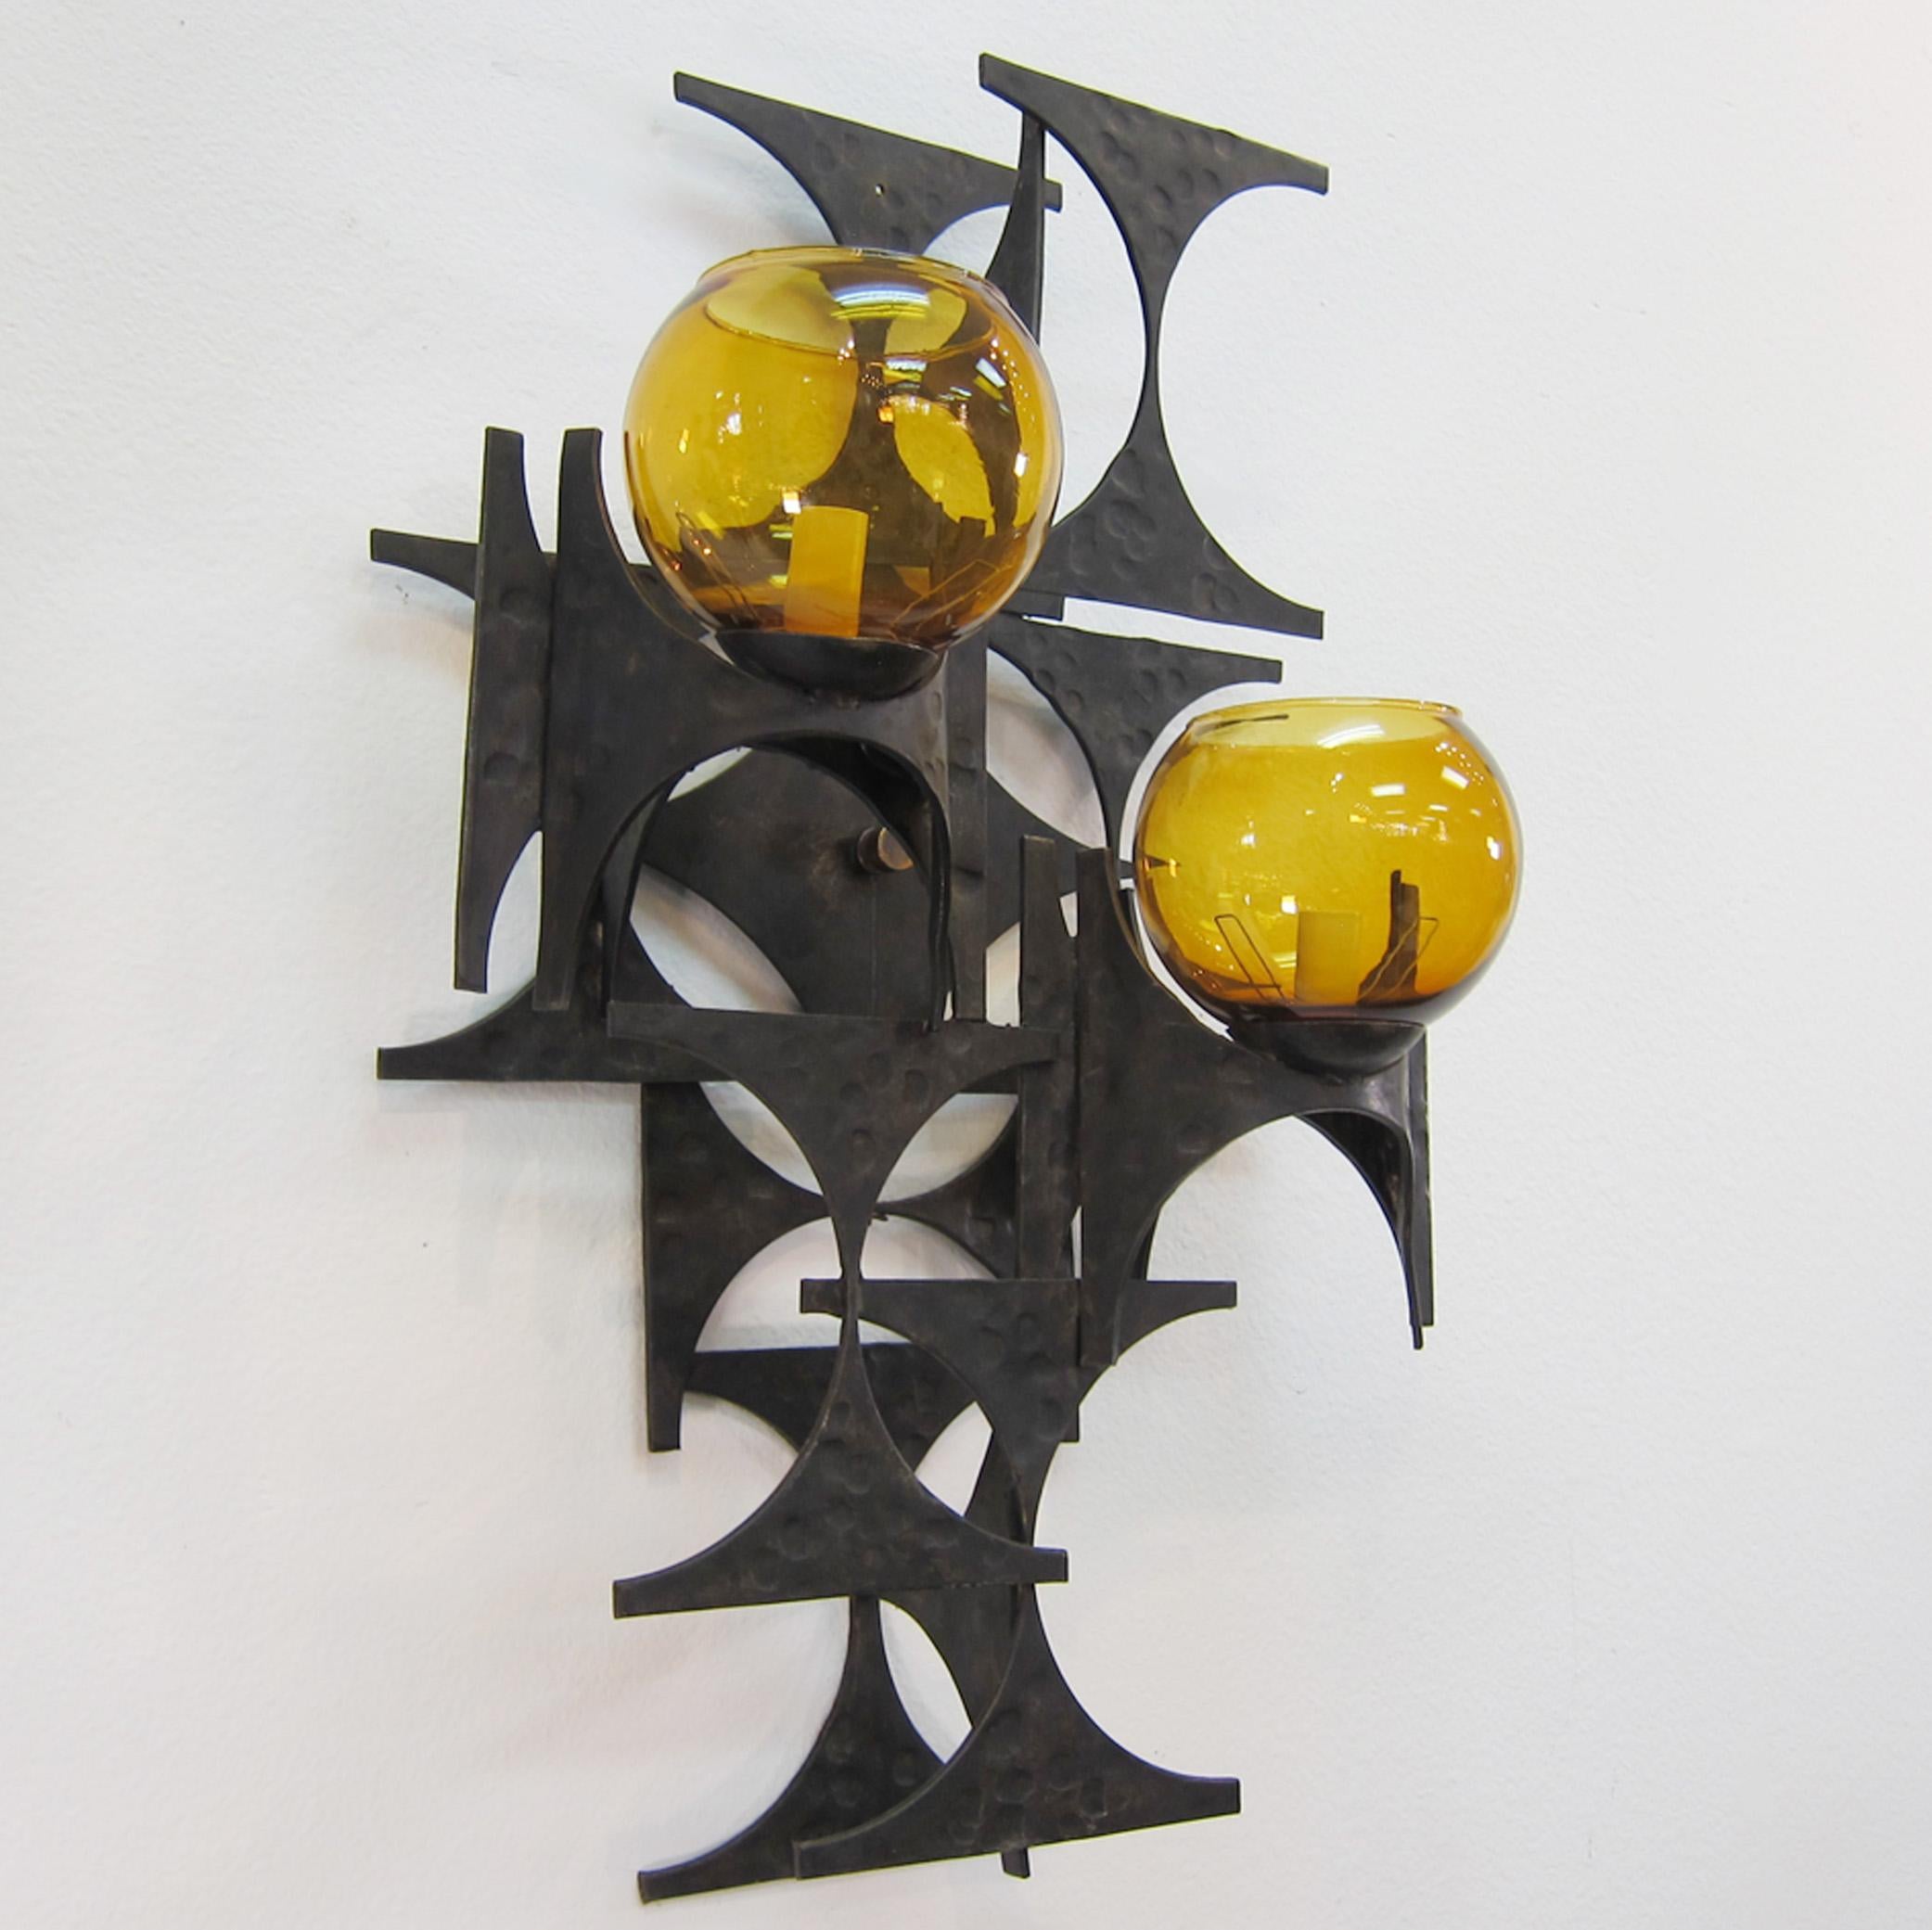 A pair of 1960s steel brutalist sconces with amber glass globes. Very sculptural with a large scale.